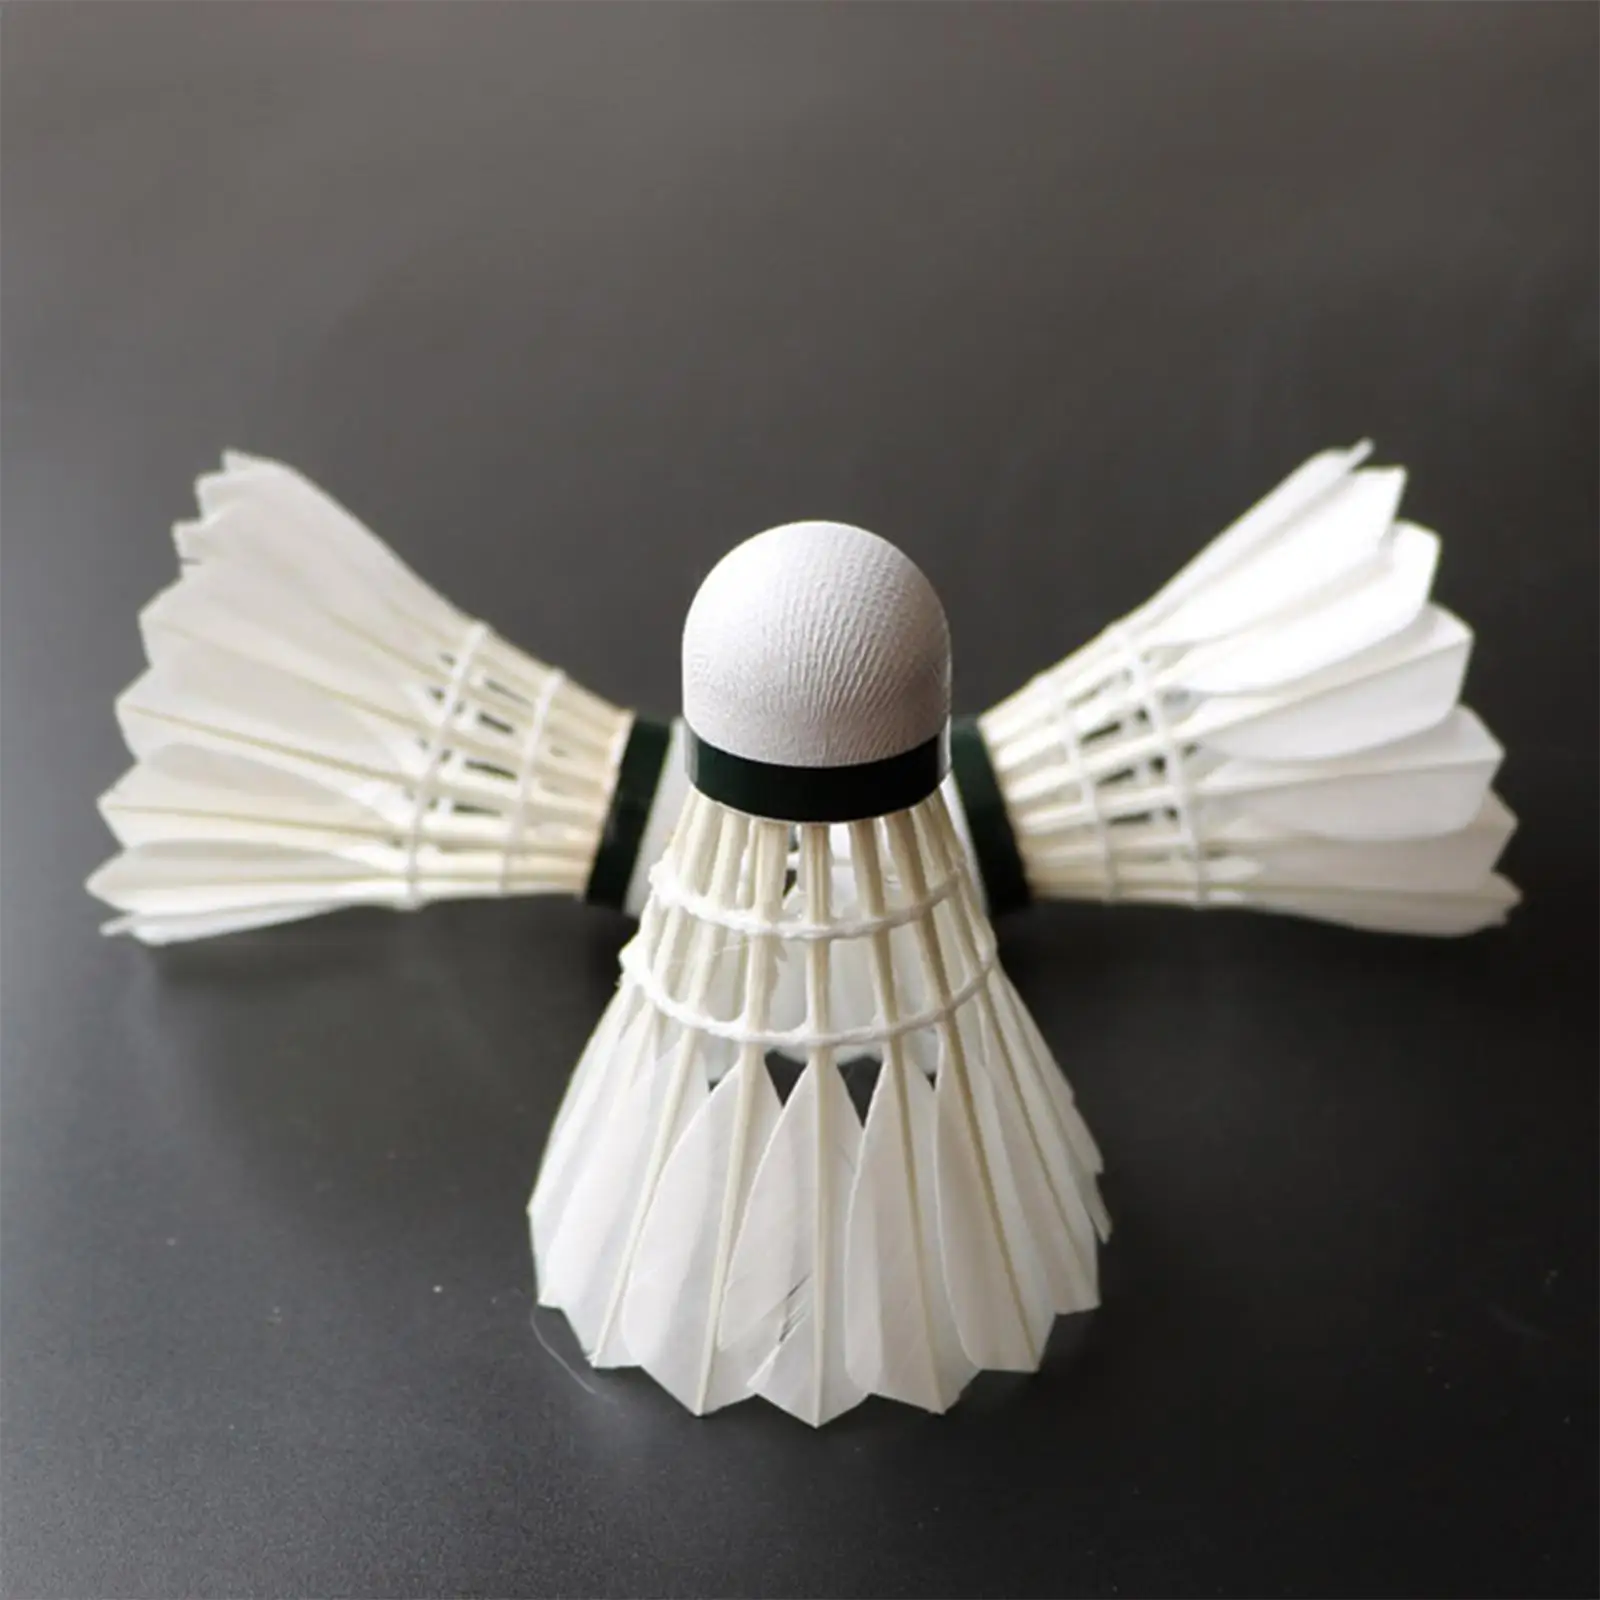 3x Badminton Shuttlecocks White for Recreational Game Play Sports Activities